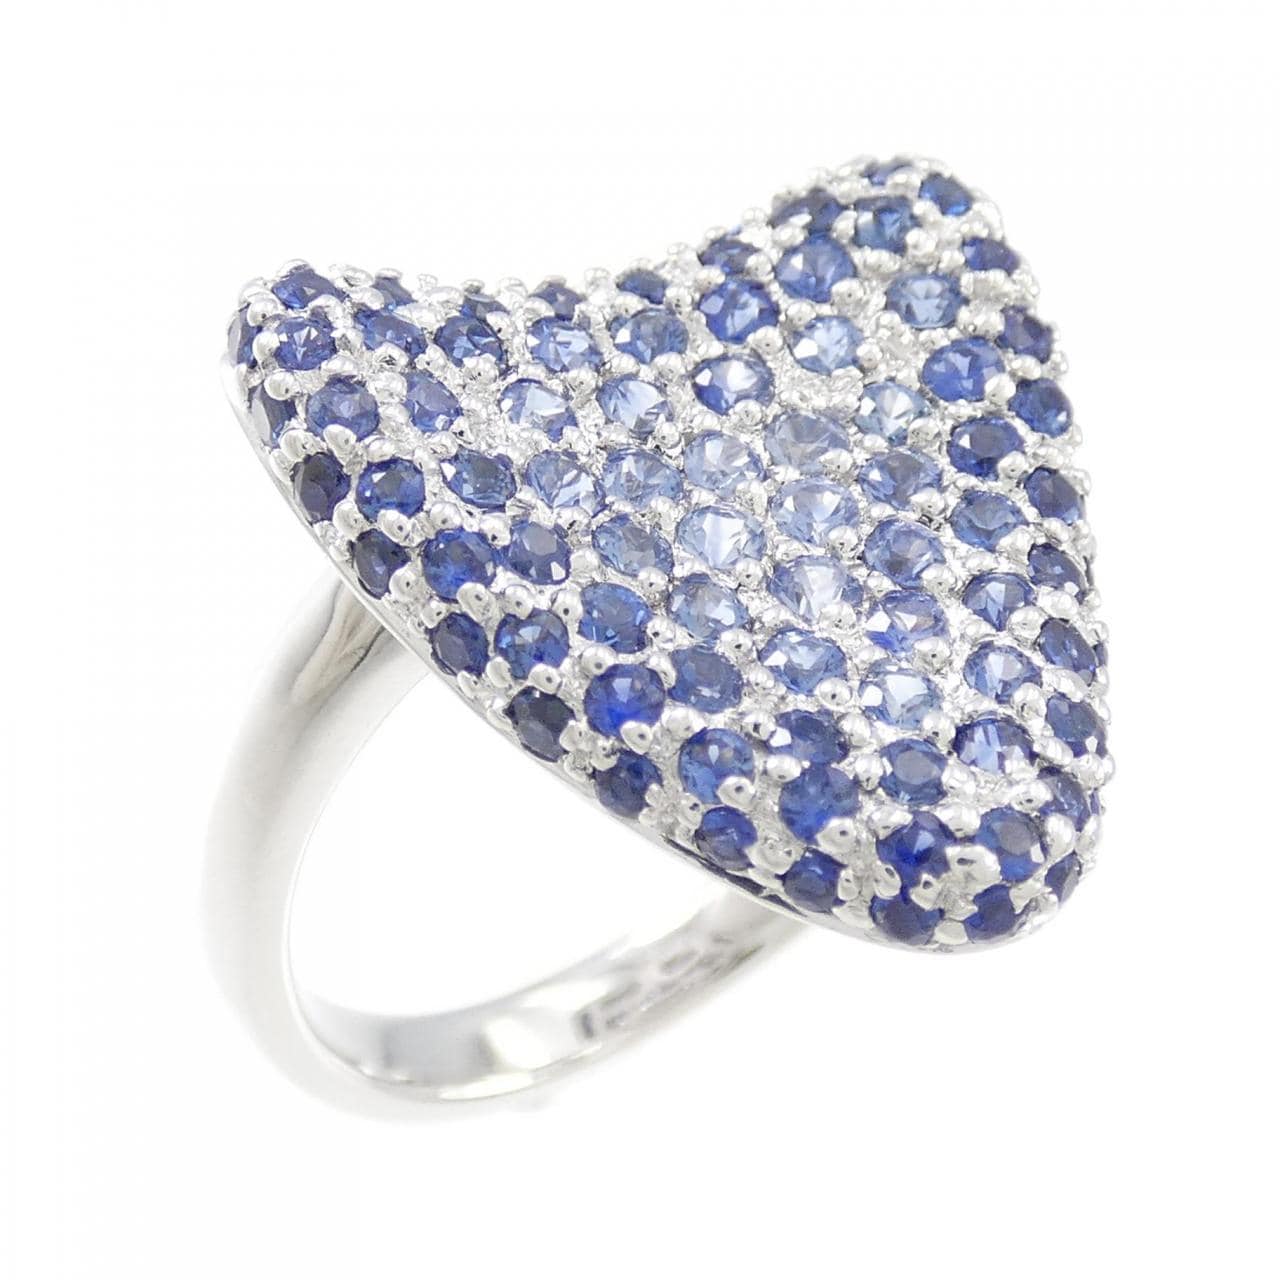 750WG Pave Sapphire Ring 1.75CT